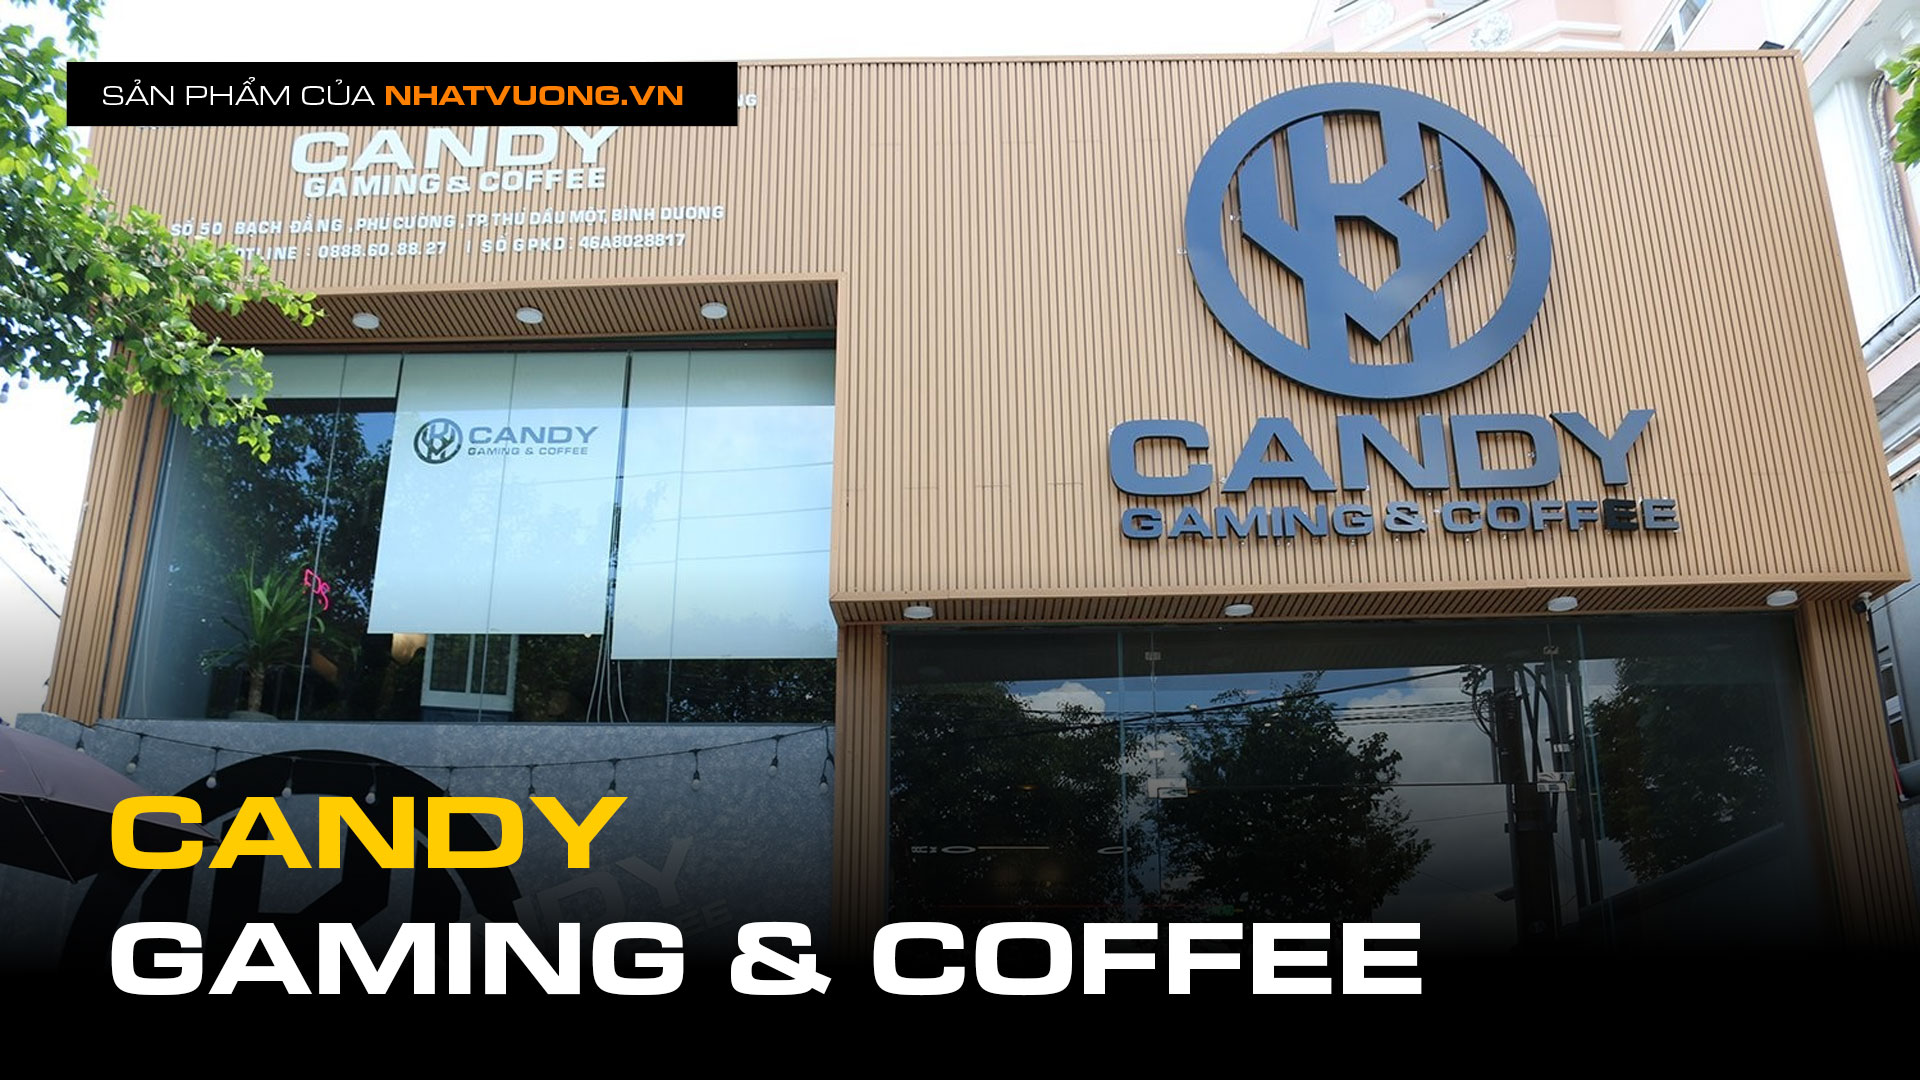 CANDY GAMING & COFFEE